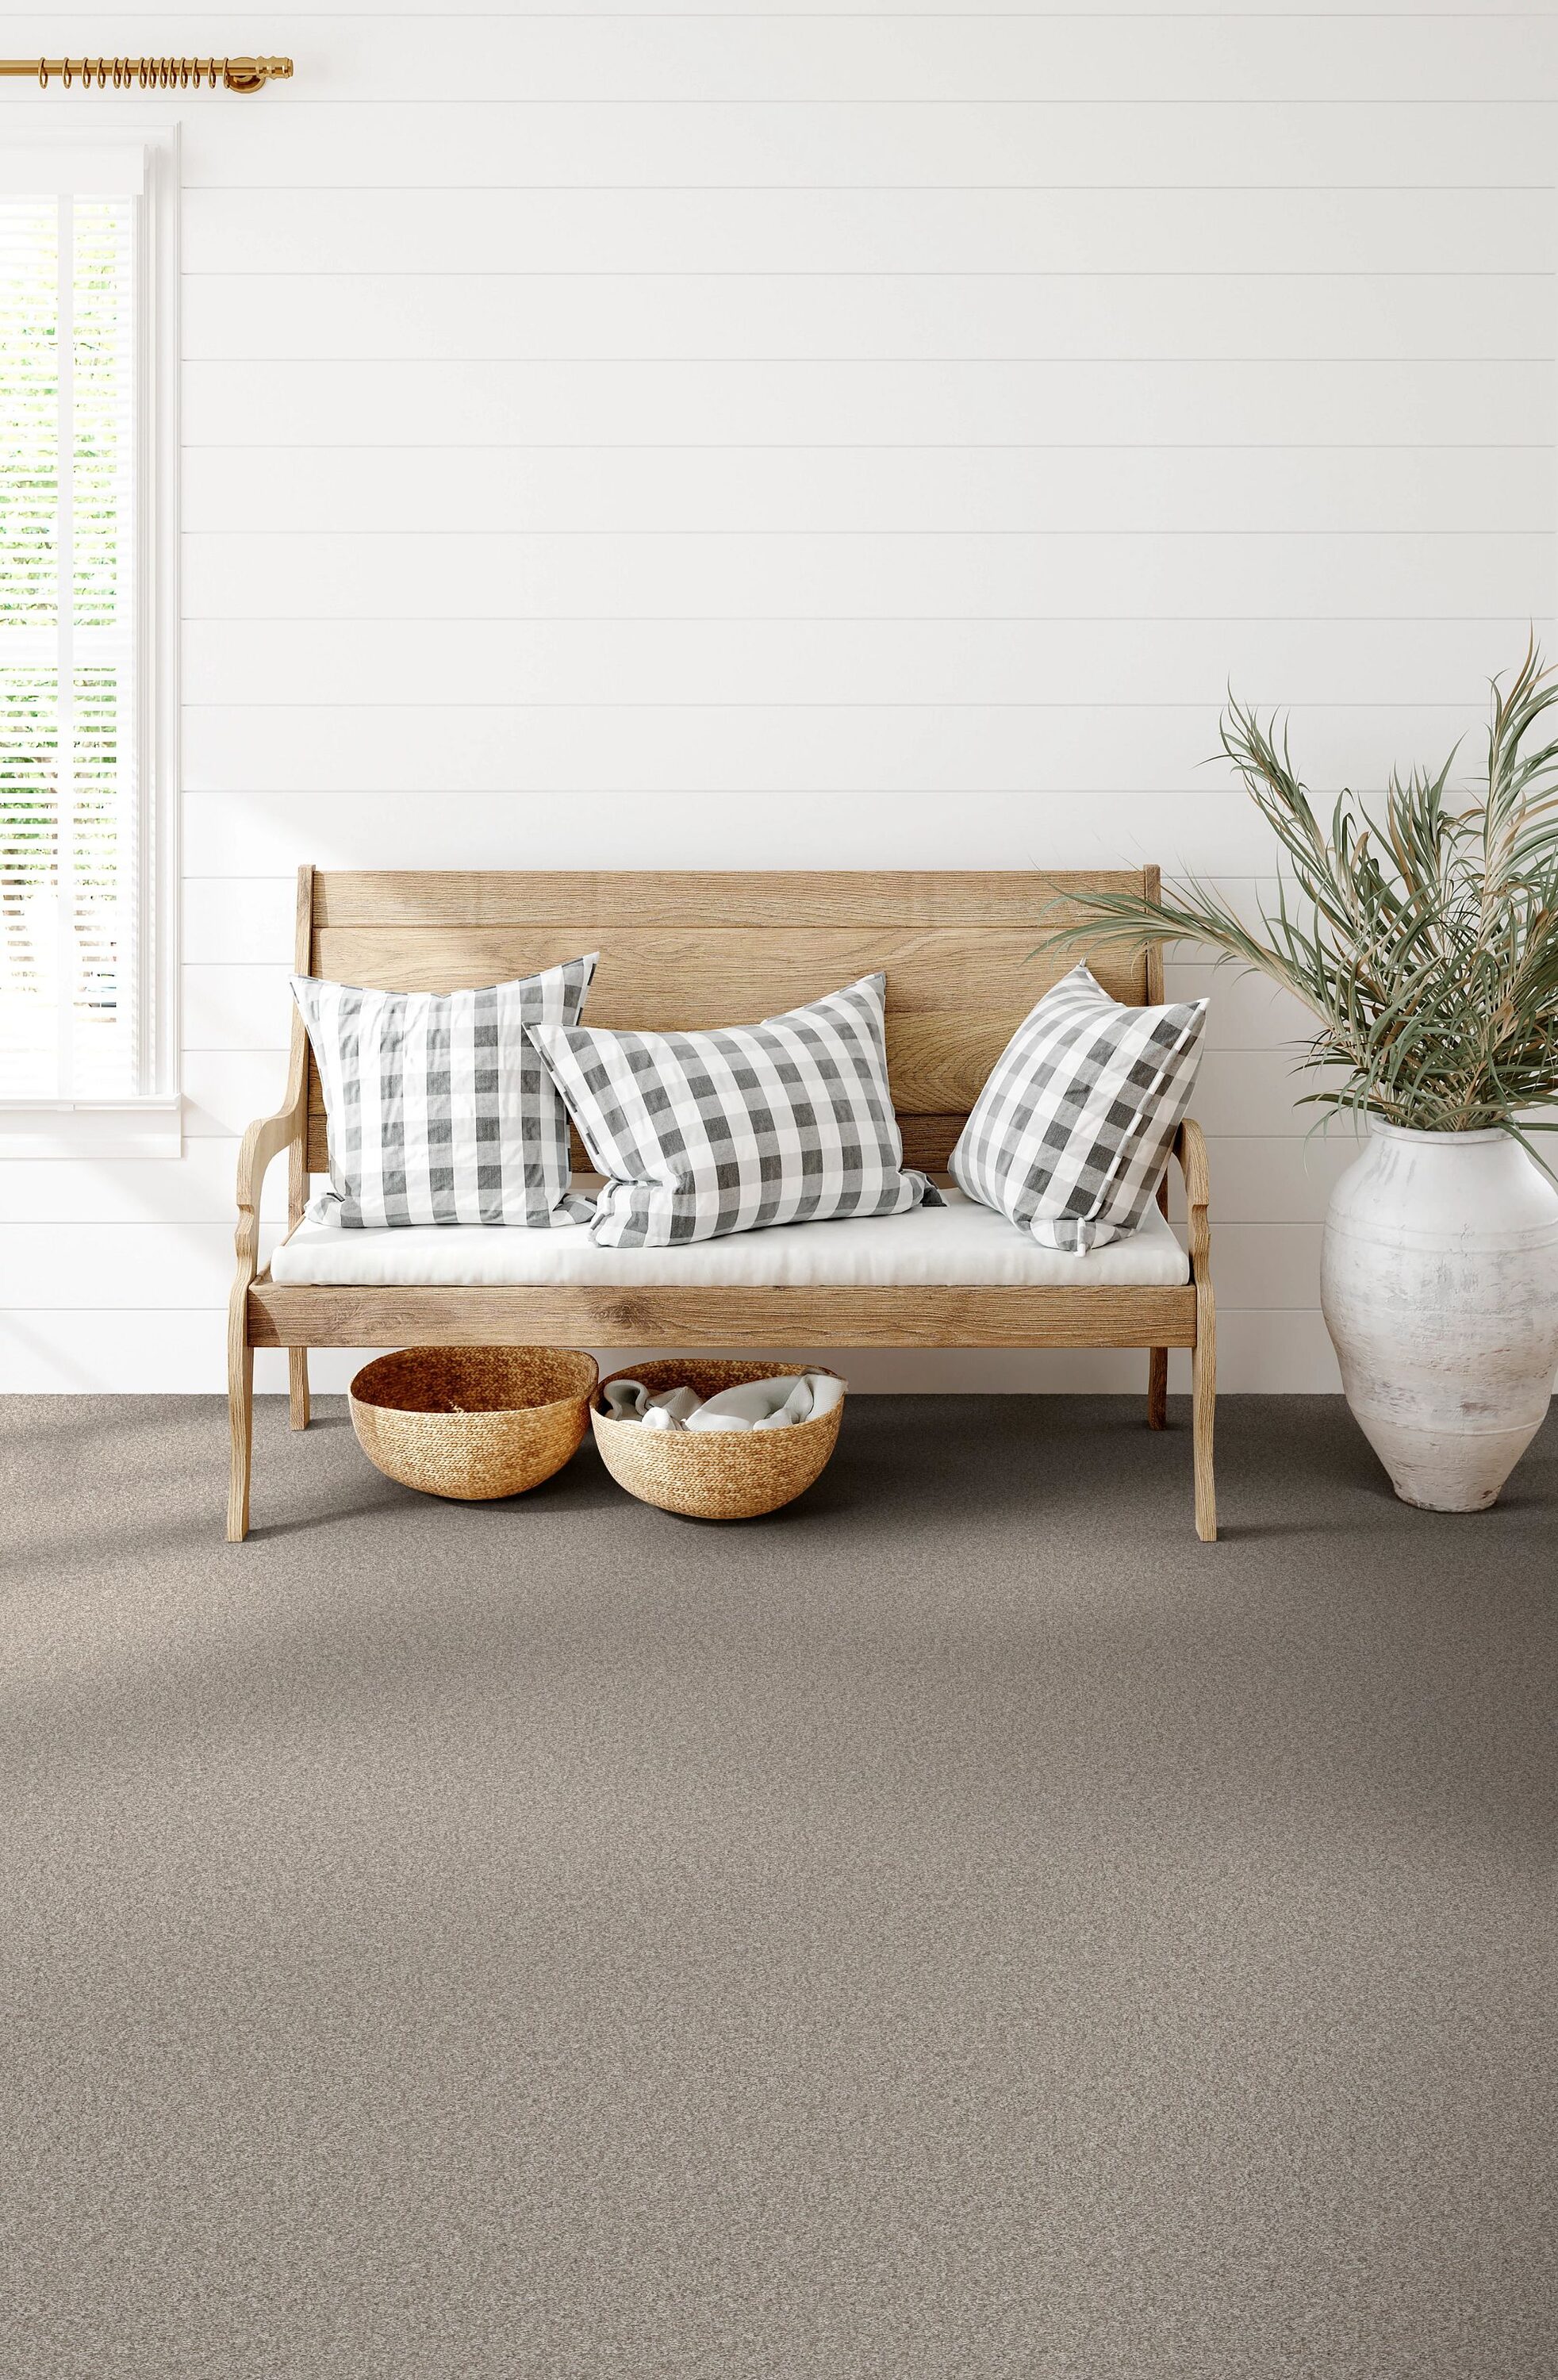 STAINMASTER Effortless Appeal at Greige Carpet Carpet Indoor the Chic in III Textured department